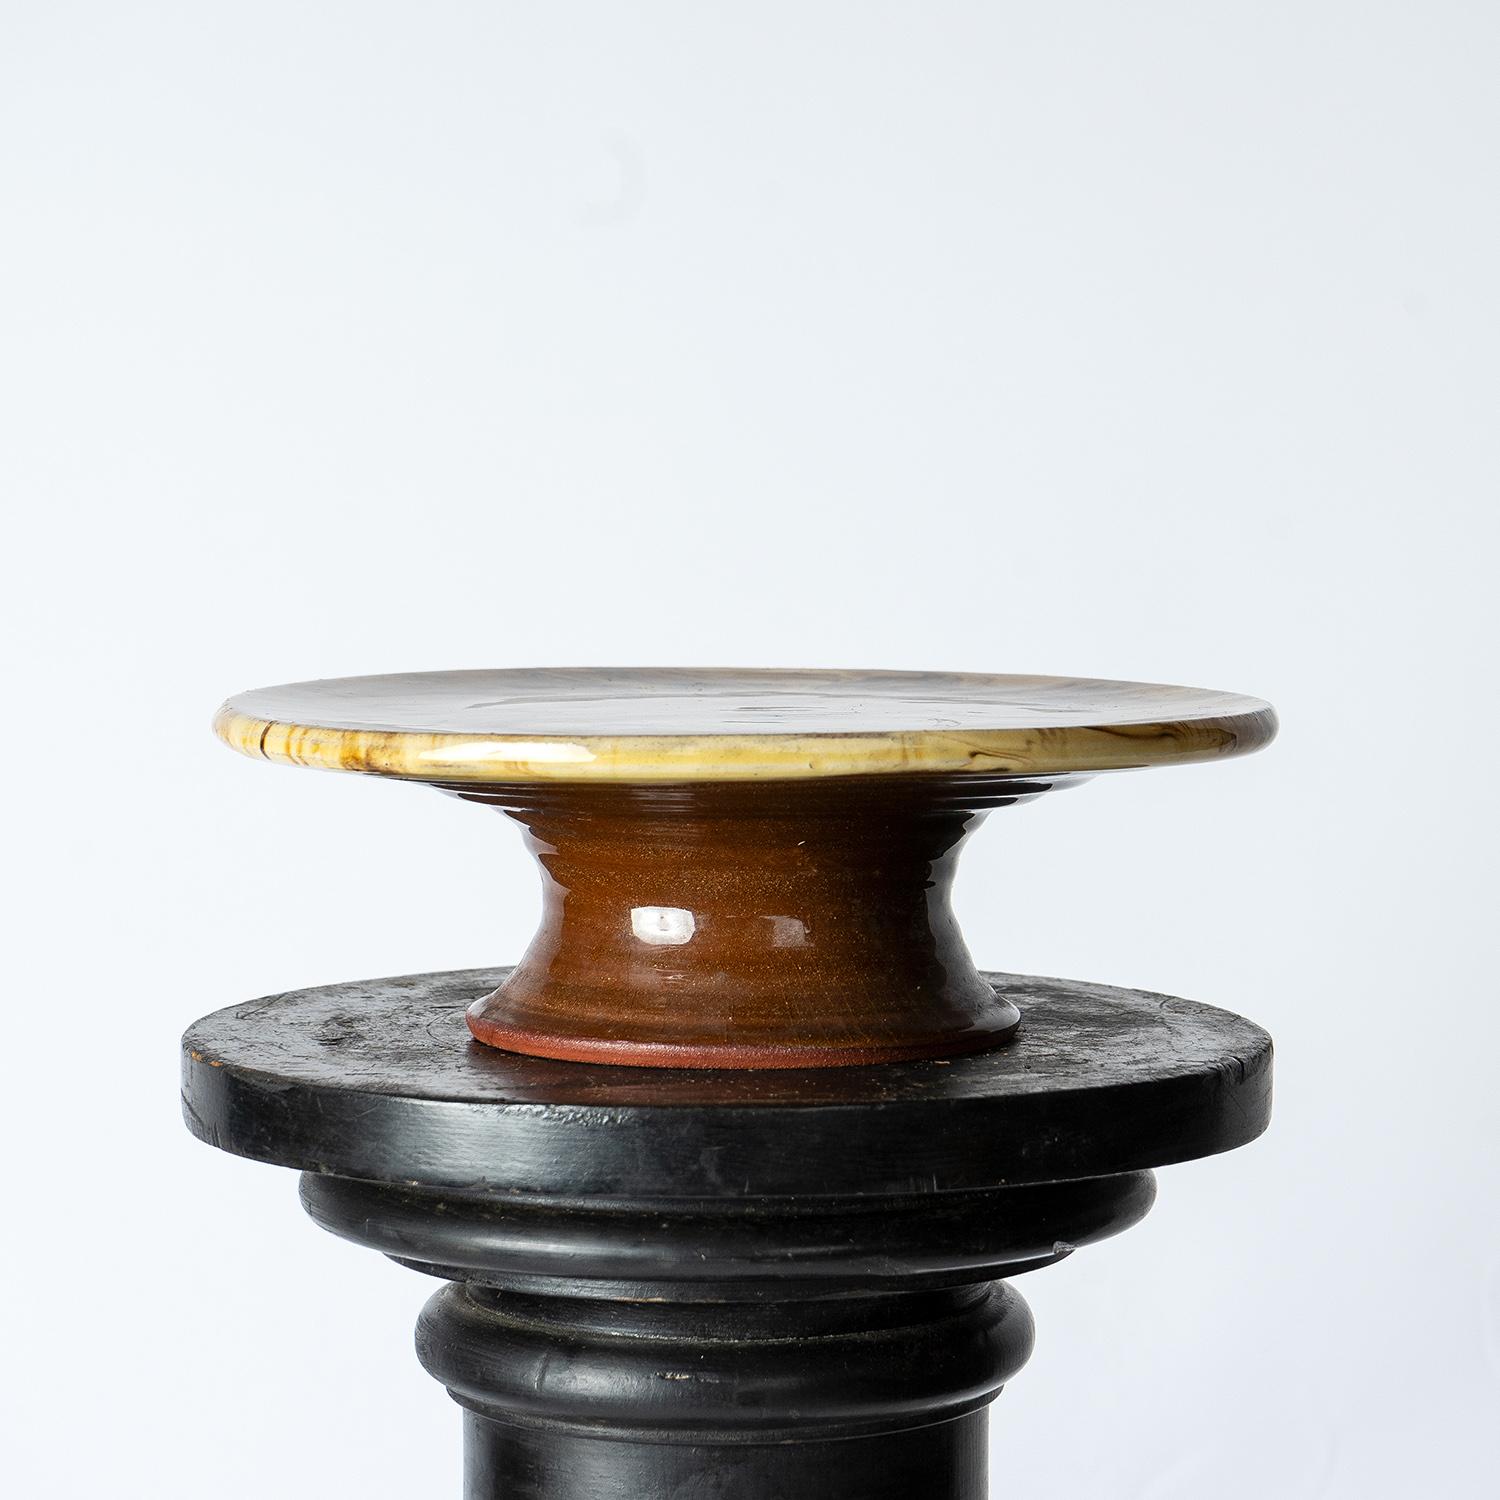 English Buckley Pottery Agate Ware Cake Stand, Early 20th Century For Sale